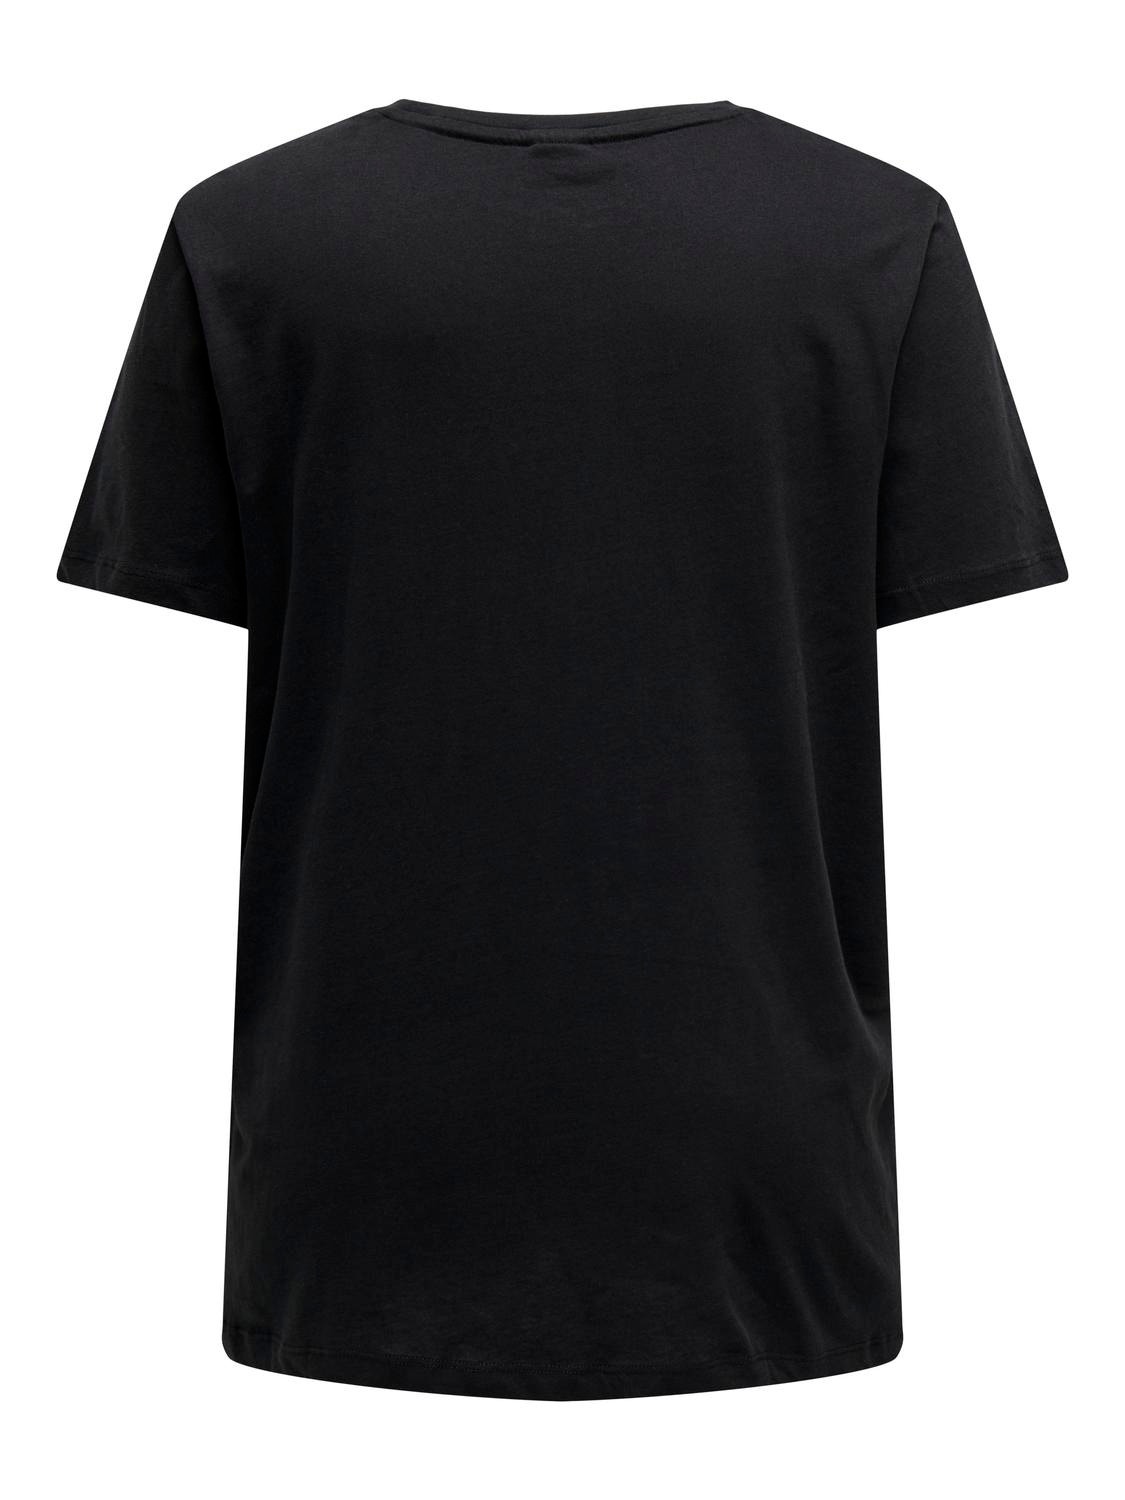 ONLY Box Fit Round Neck T-Shirt -Black - 15317413